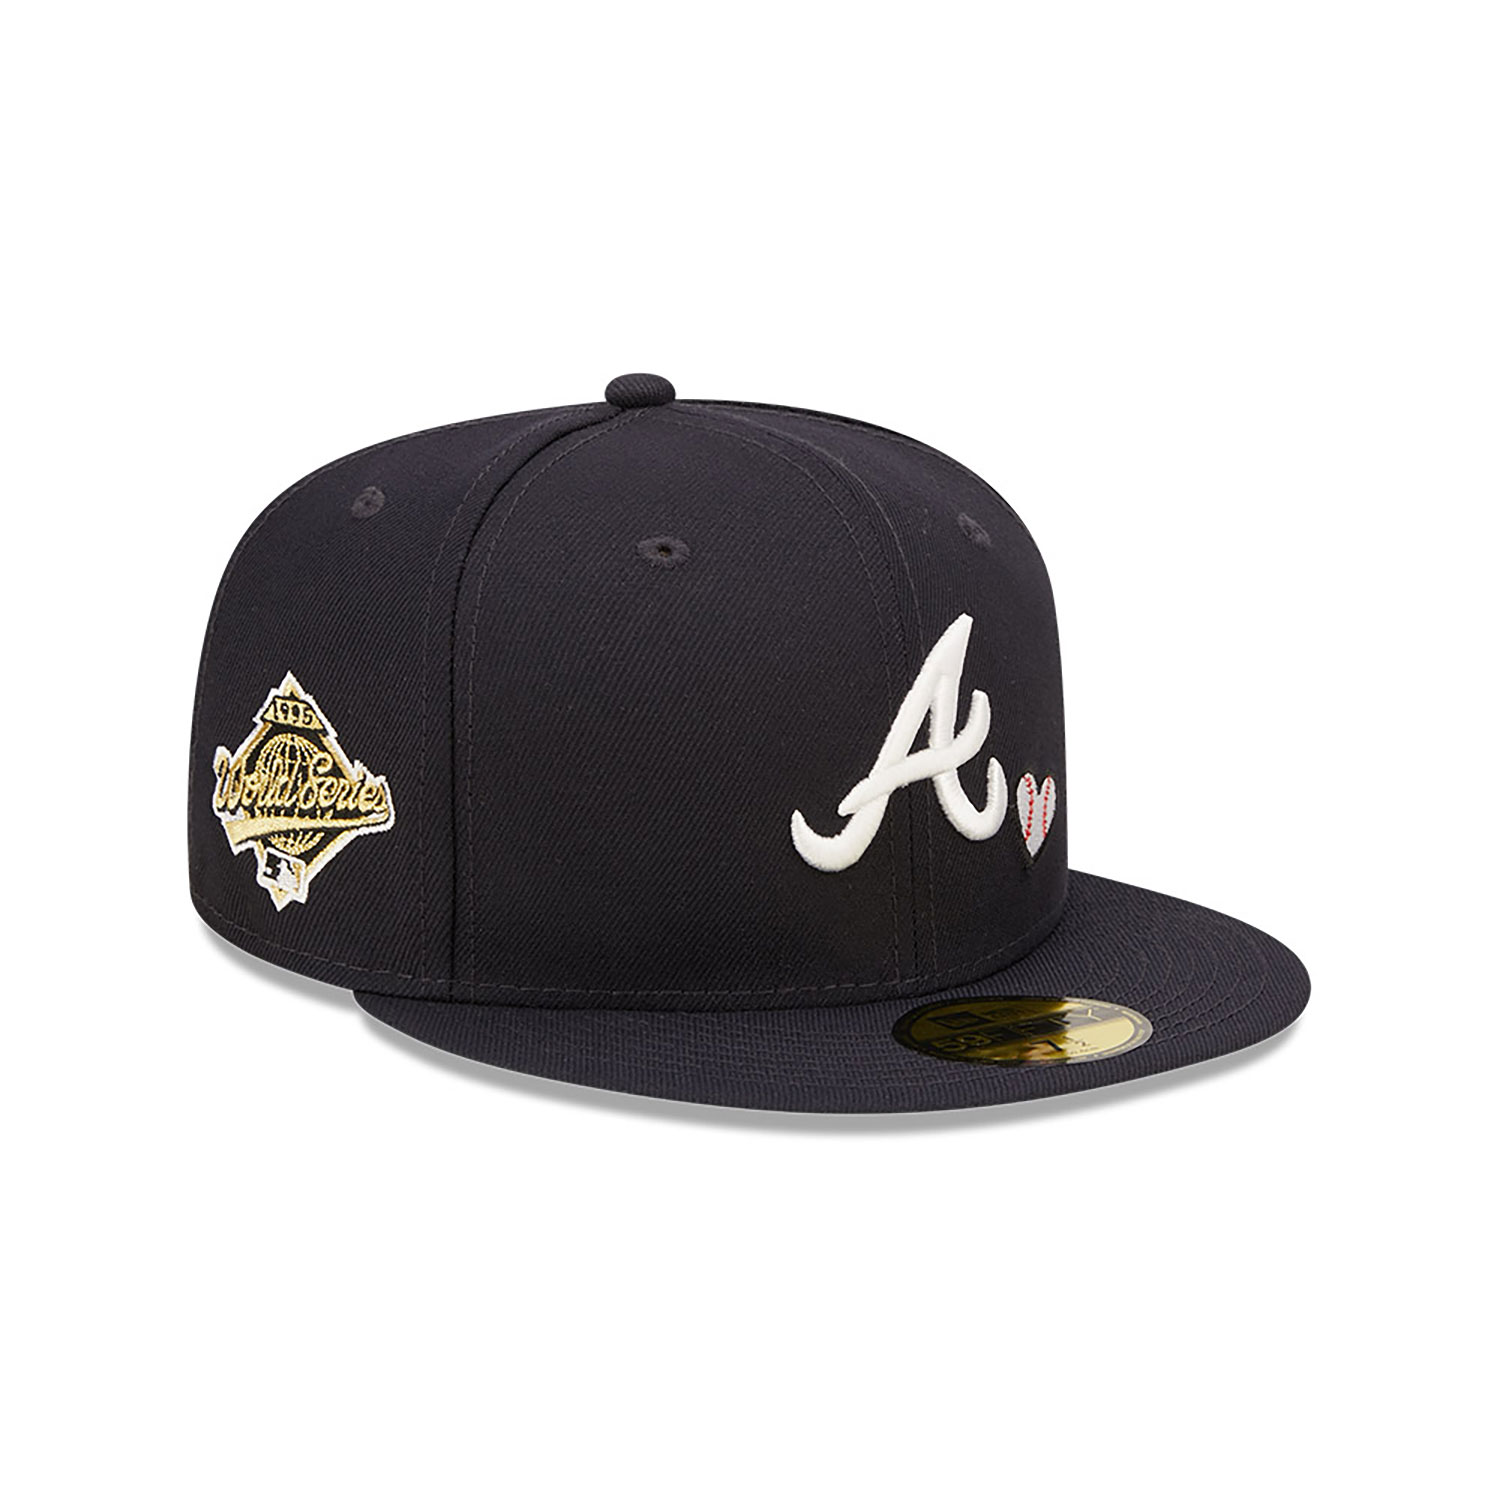 New Era 59fifty - Just Caps DROP 1 Atlanta Braves Size 7 1/4 Fitted - Hat  Club